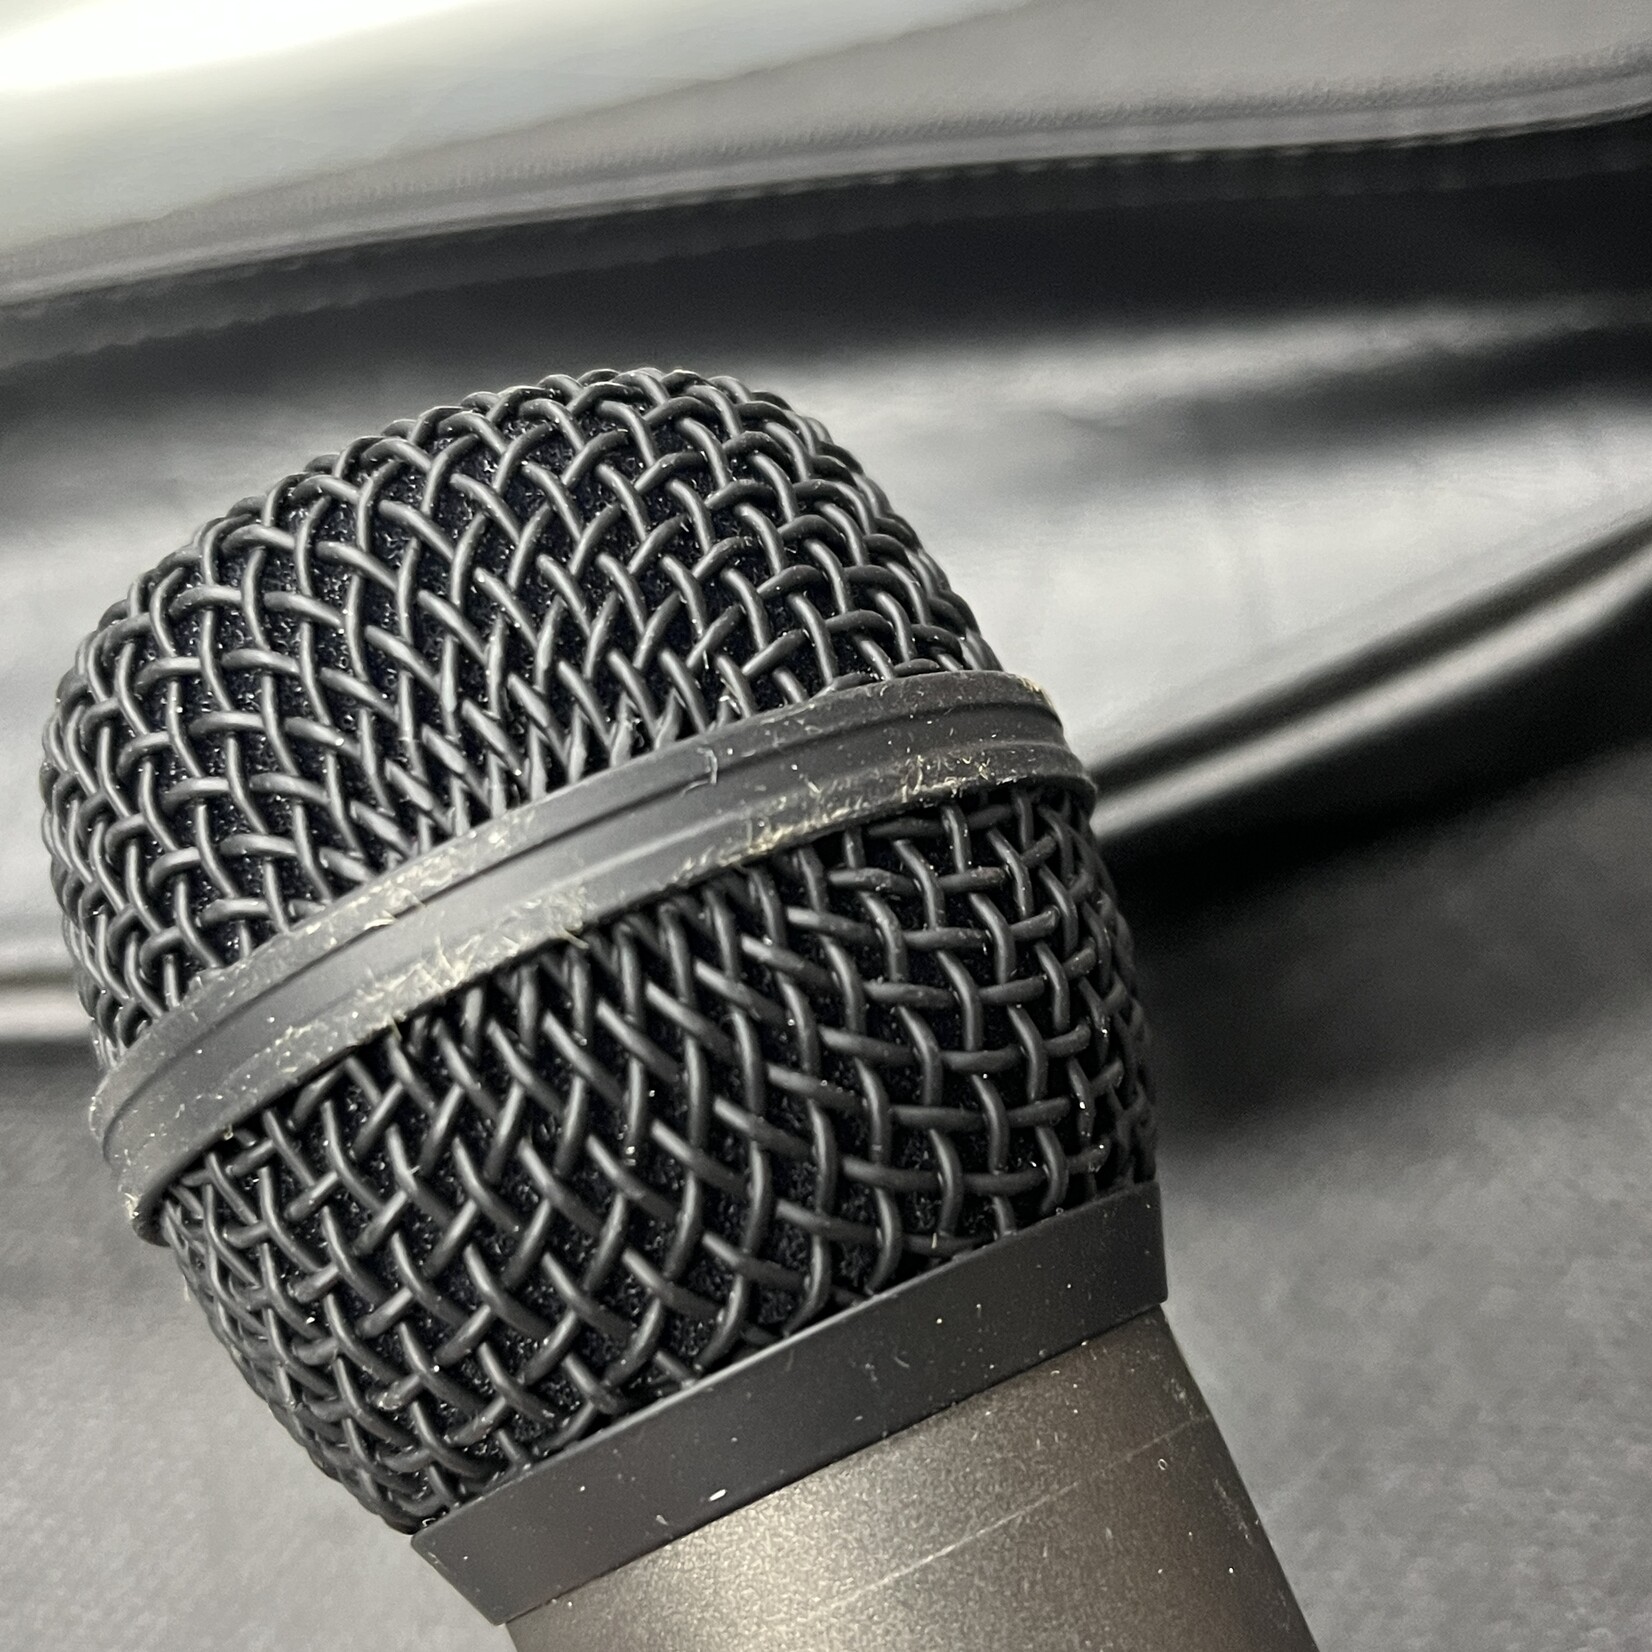 CAD D189 Supercardioid Dynamic Microphone - (Used)